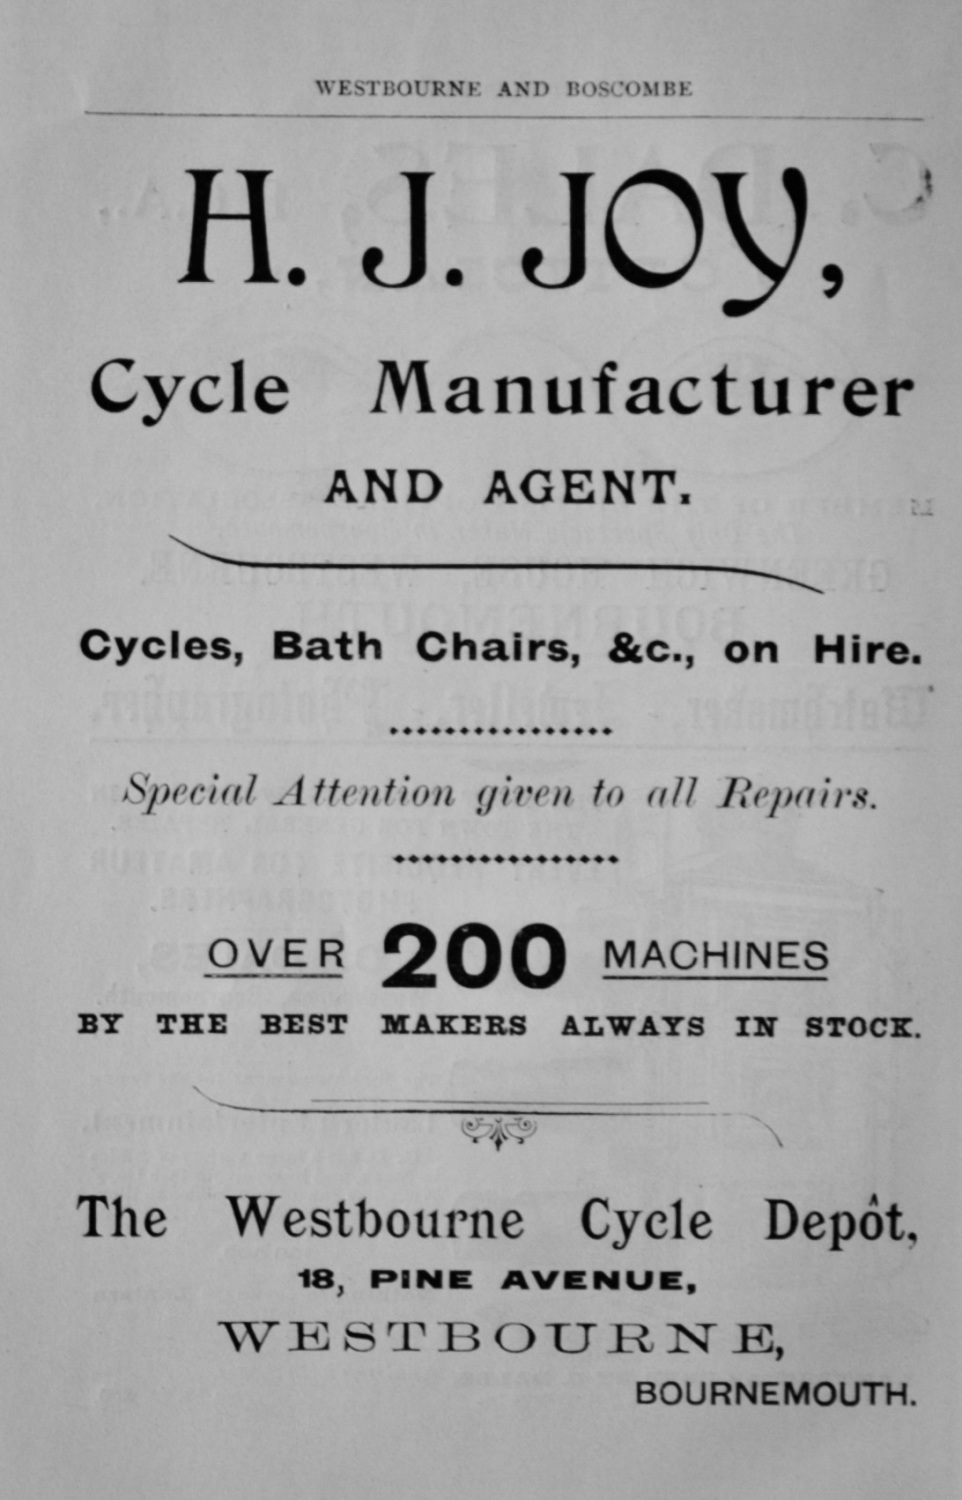 H. J. Joy, Cycle Manufacturer and Agent. The Westbourne Cycle Depot, 18, Pi